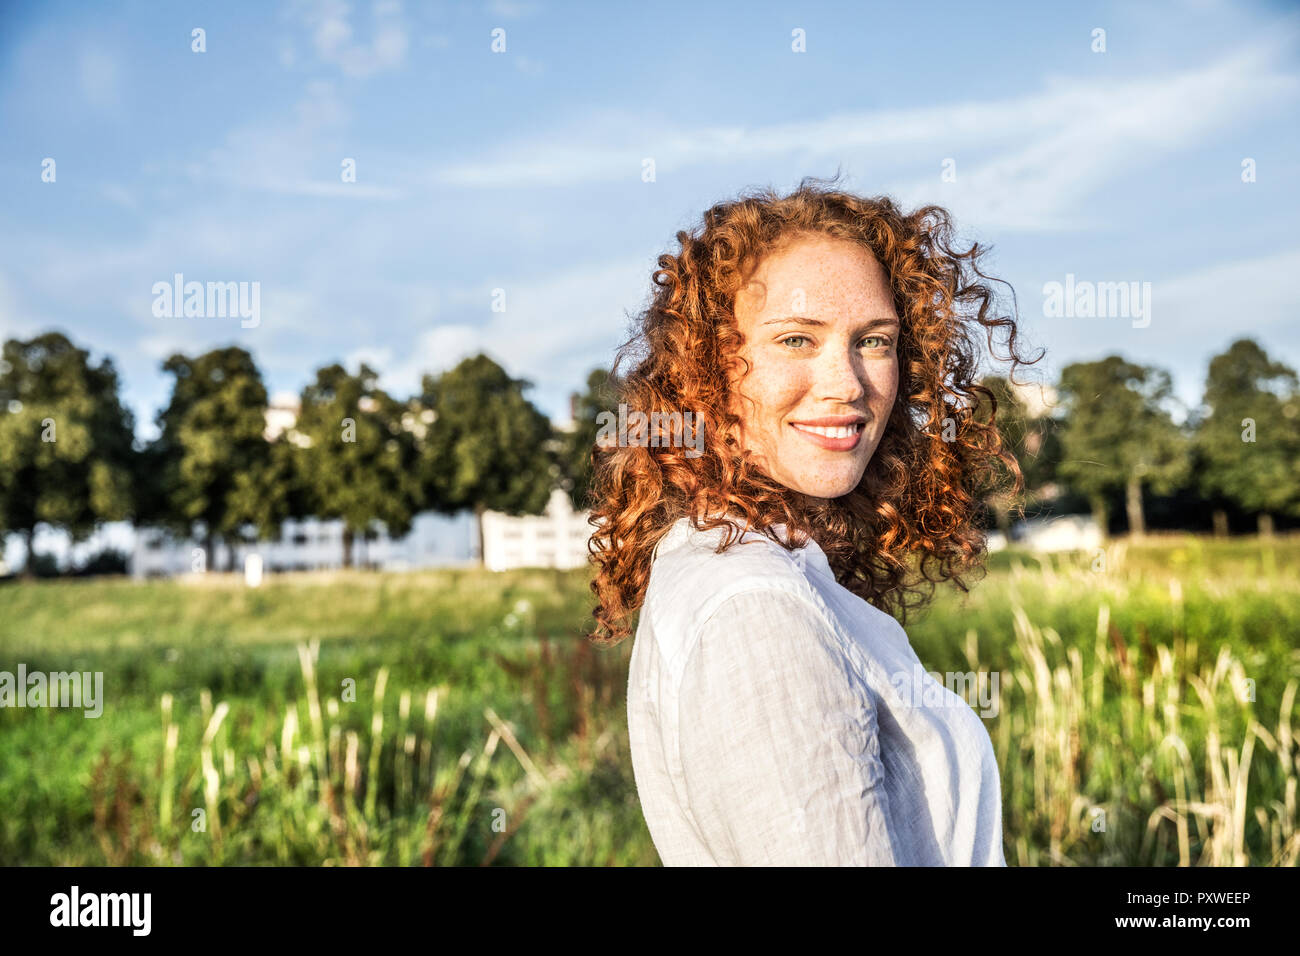 Germany, Cologne, portrait of smiling young woman with curly red hair in nature Stock Photo